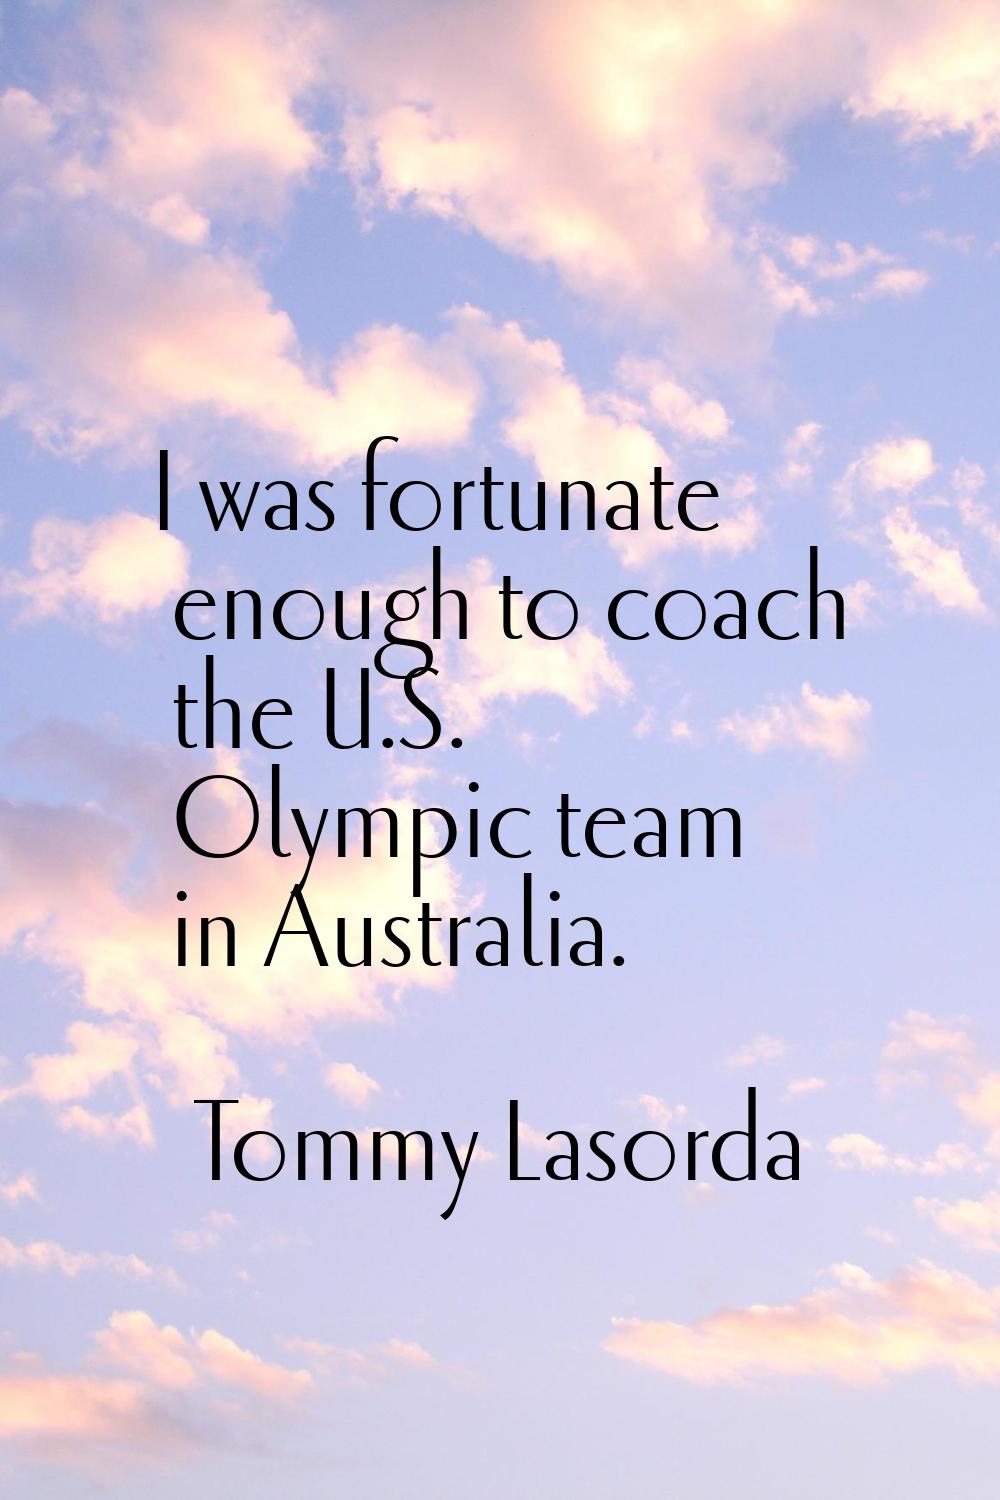 I was fortunate enough to coach the U.S. Olympic team in Australia.